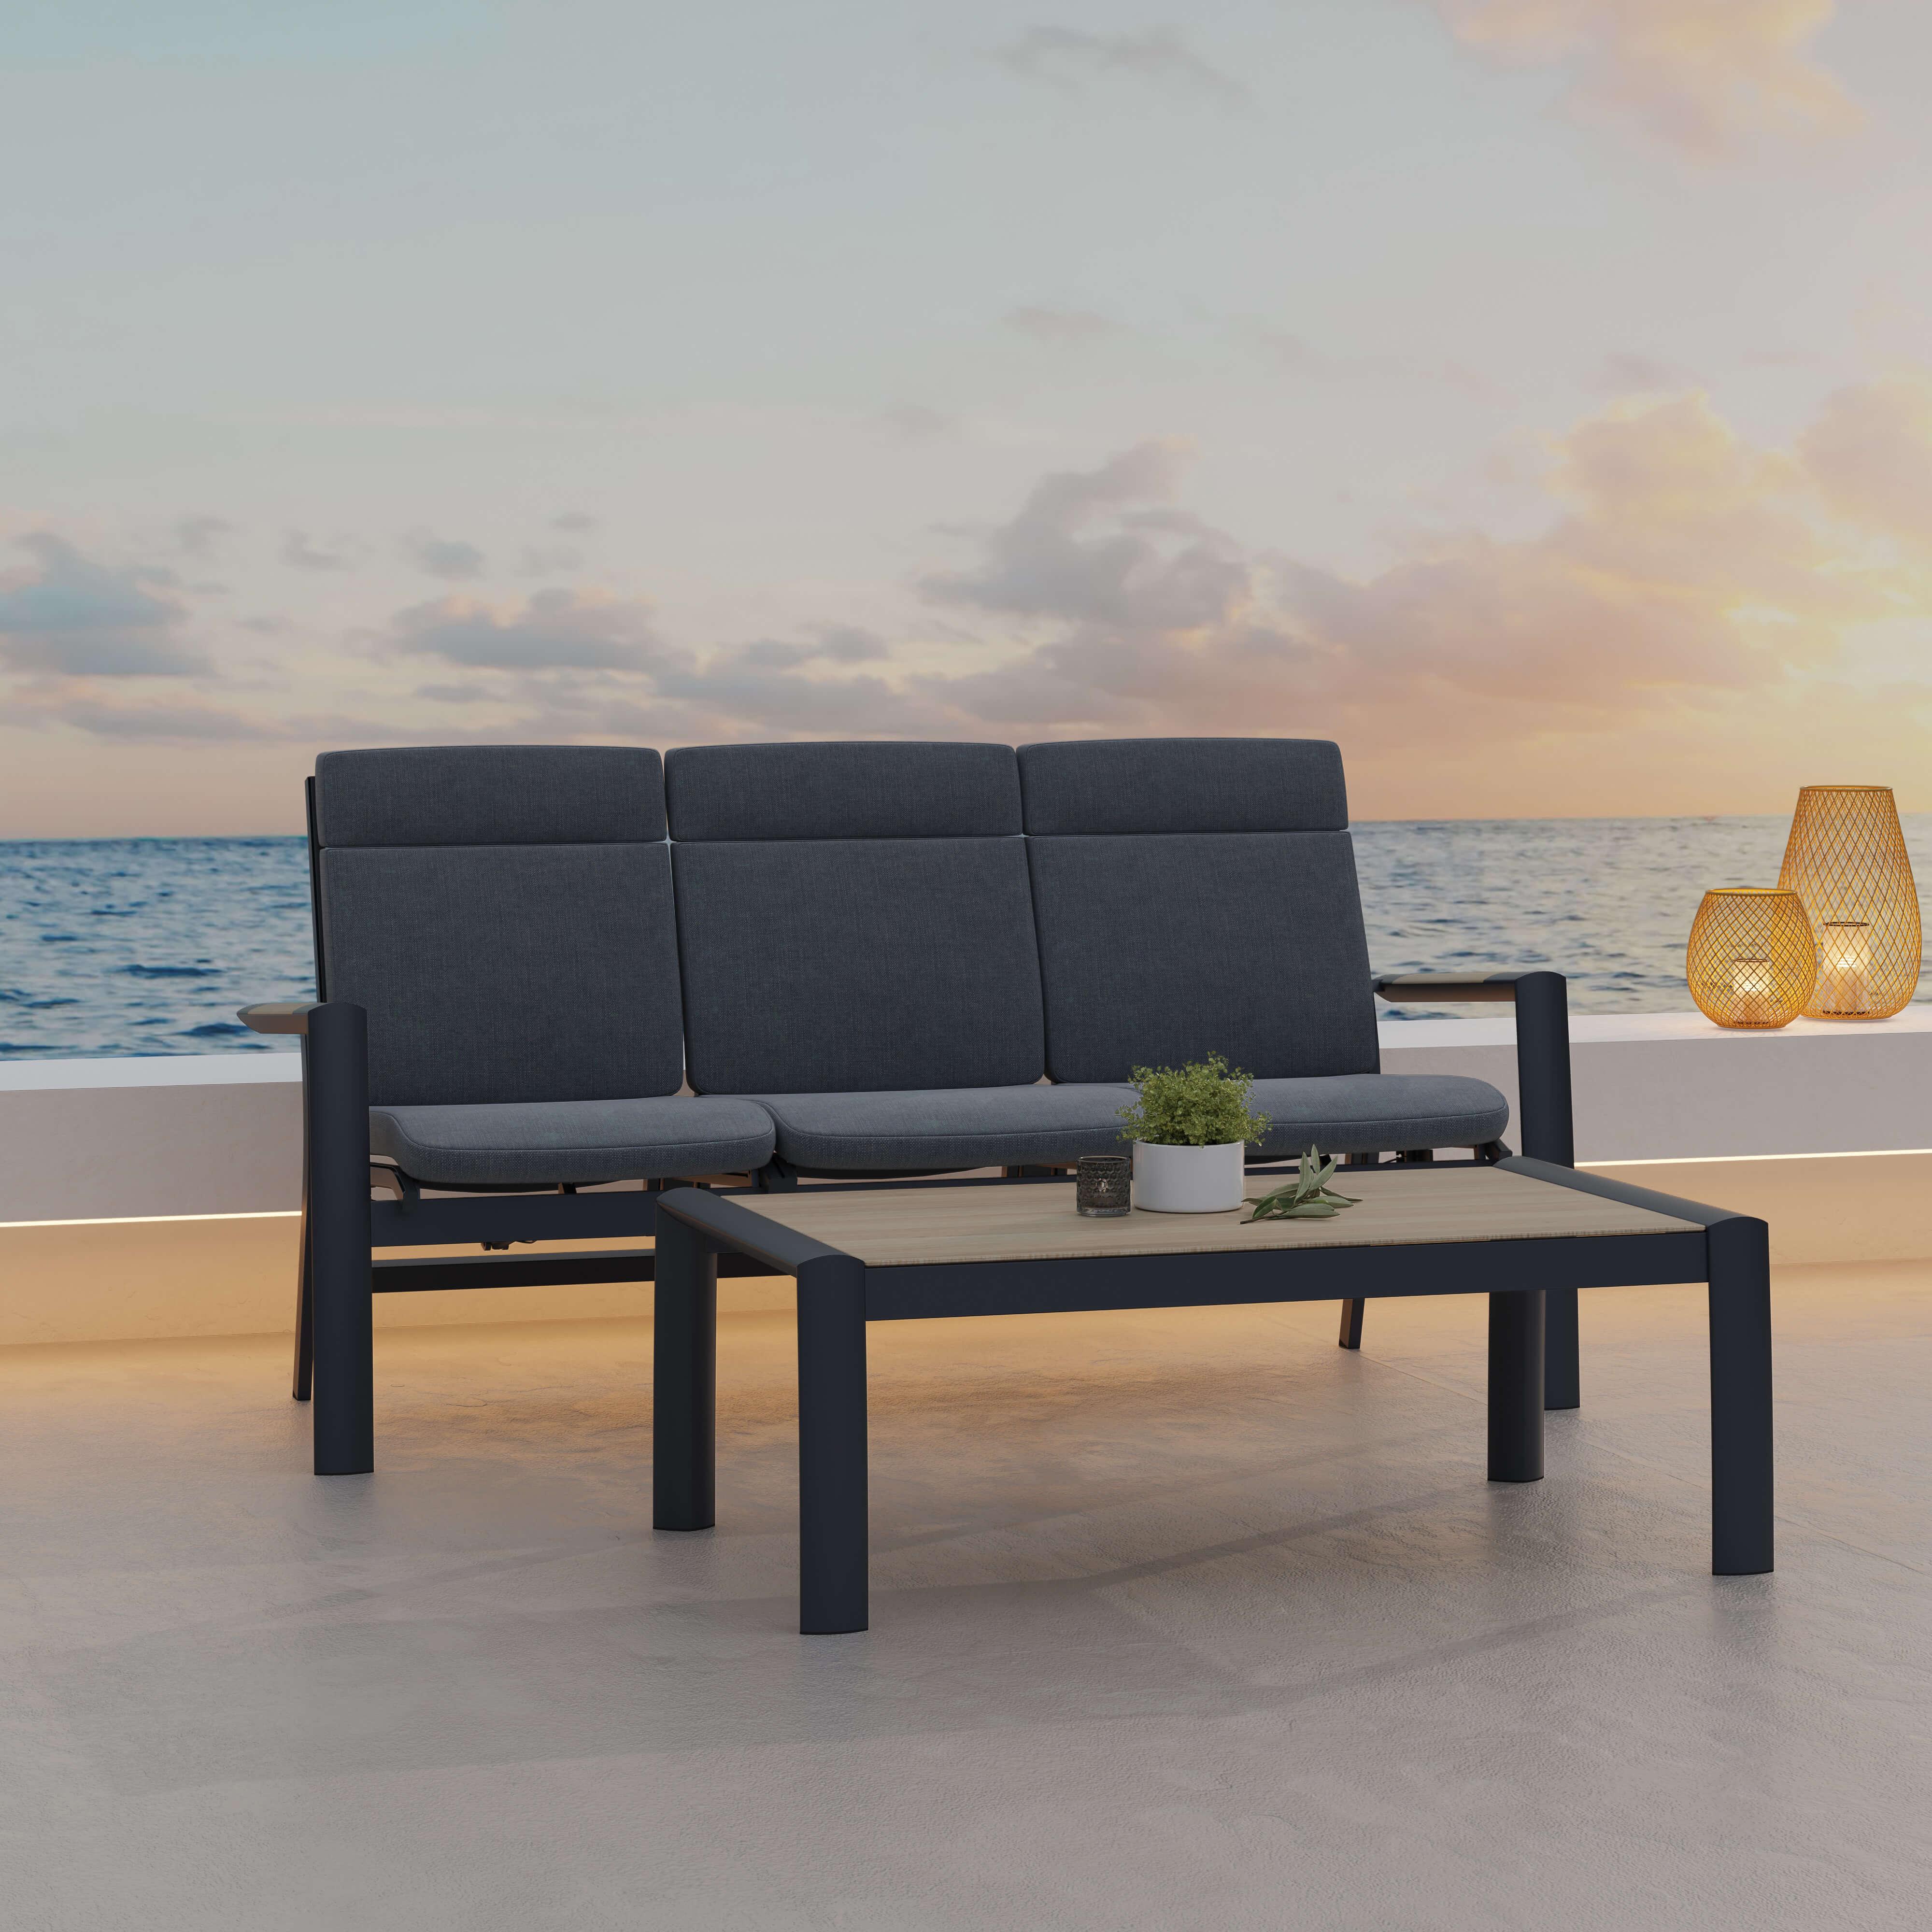 Capri Modern Aluminum Outdoor Furniture, adjustable 3-seater outdoor Sofa with grey cushions + 1 rectangle coffee table, on the deck, beside the sea- Jardina Furniture